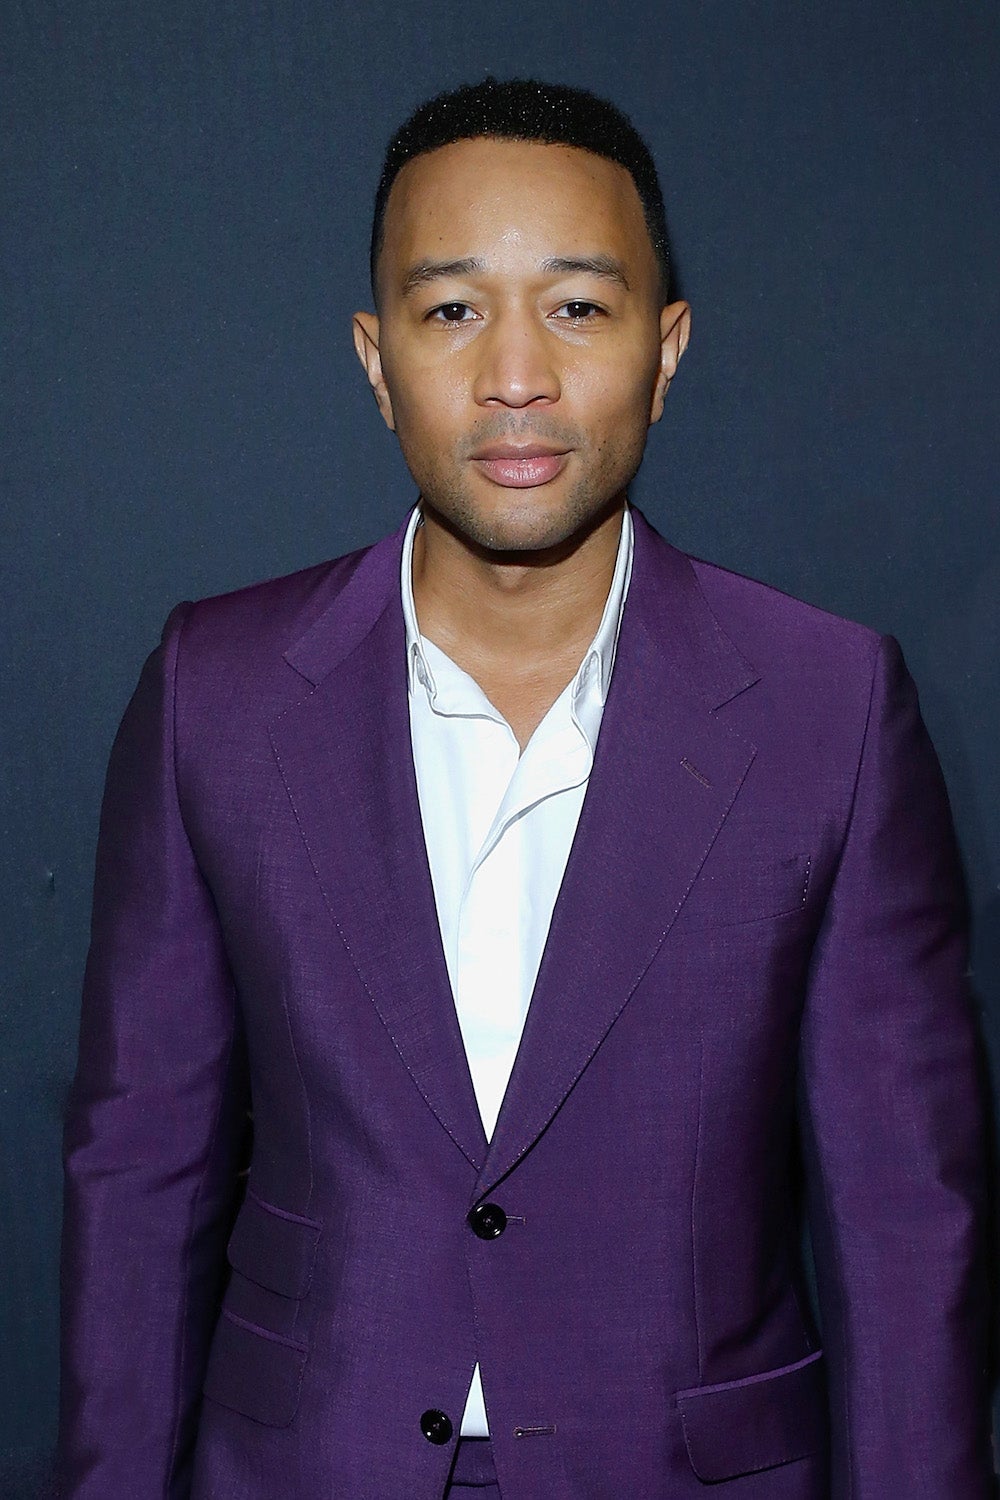 John Legend Reveals Another Reason Why He Participated In 'Surviving R. Kelly' Doc